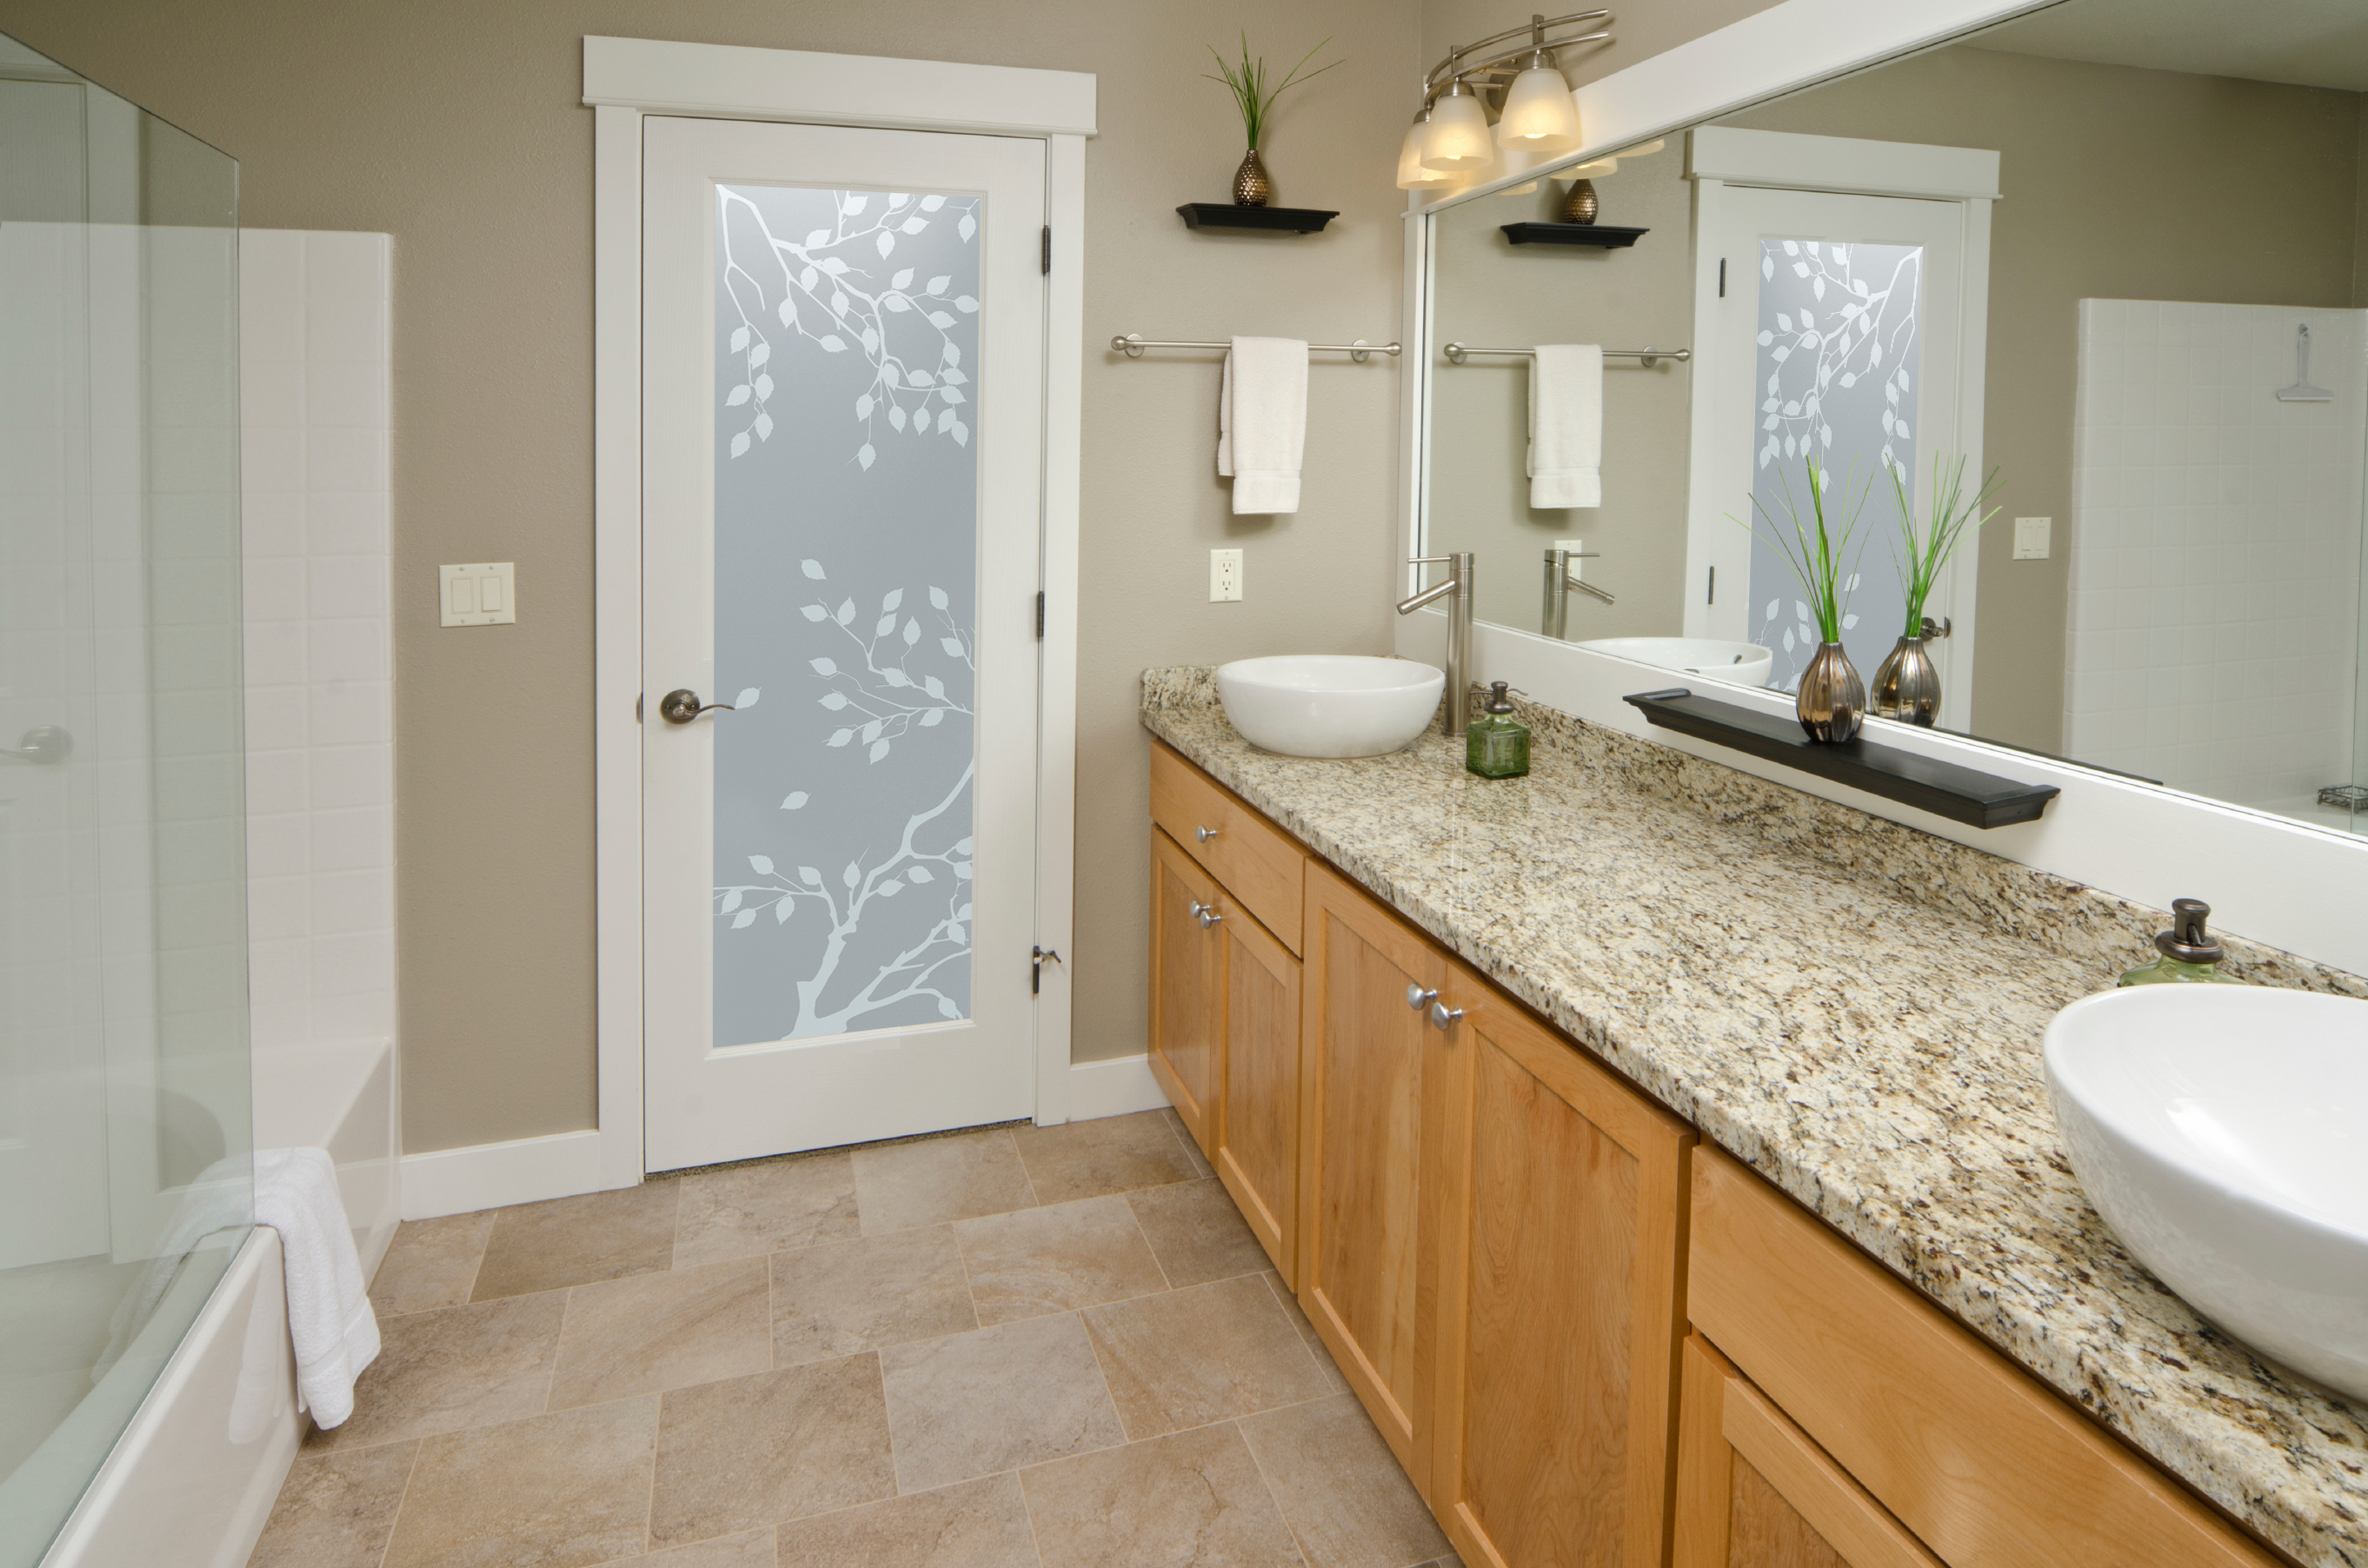 A bathroom with a private frosted glass door featuring a "Cherry Tree" design.